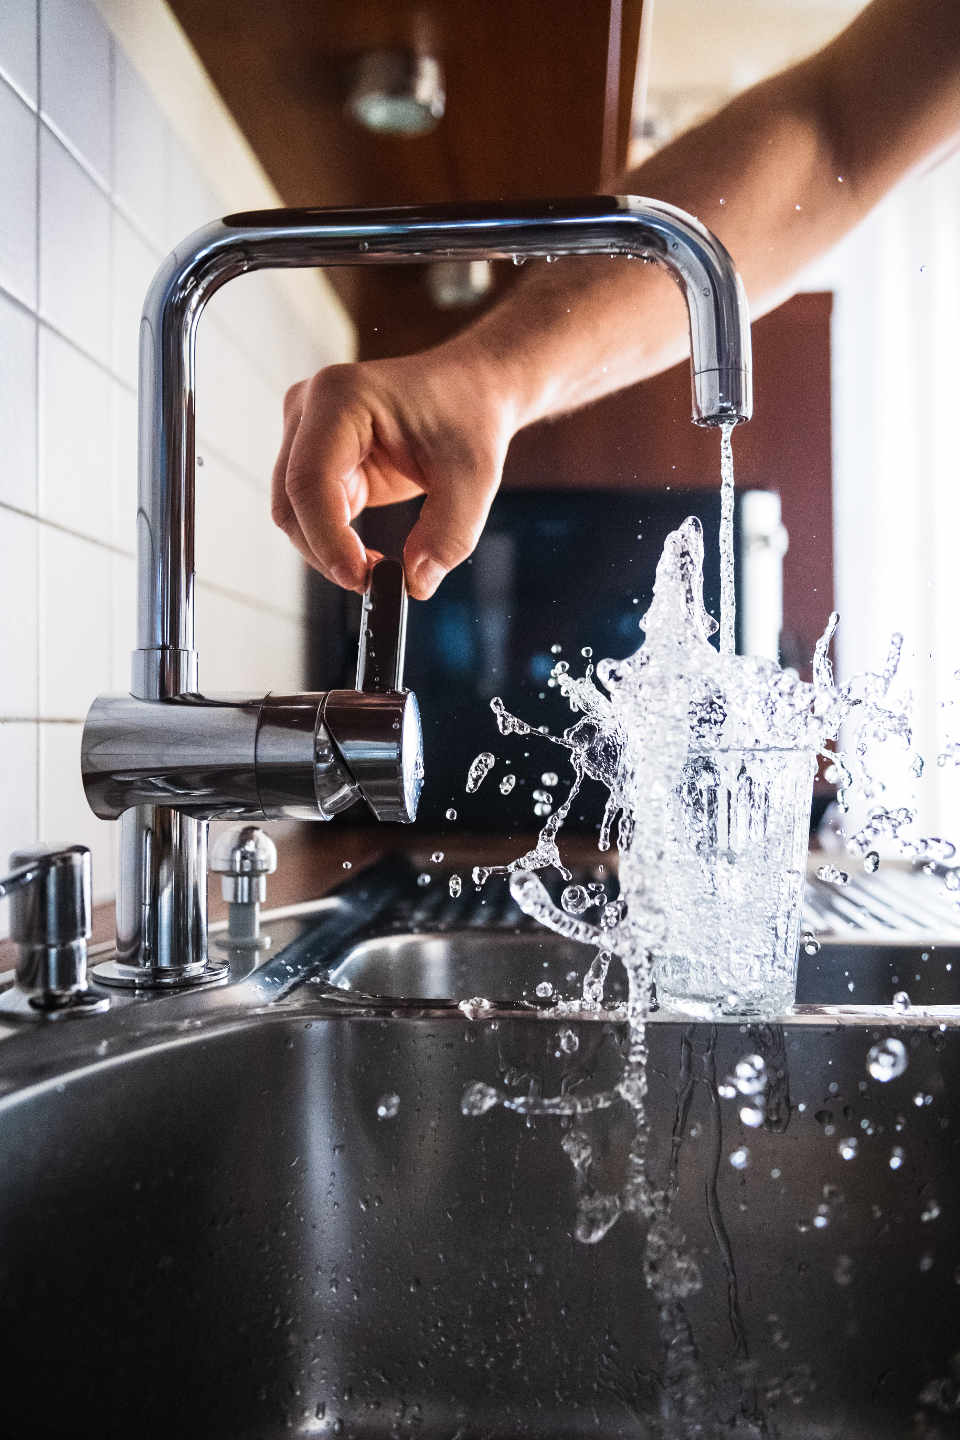 Bad habits are the most popular way to wasting water 